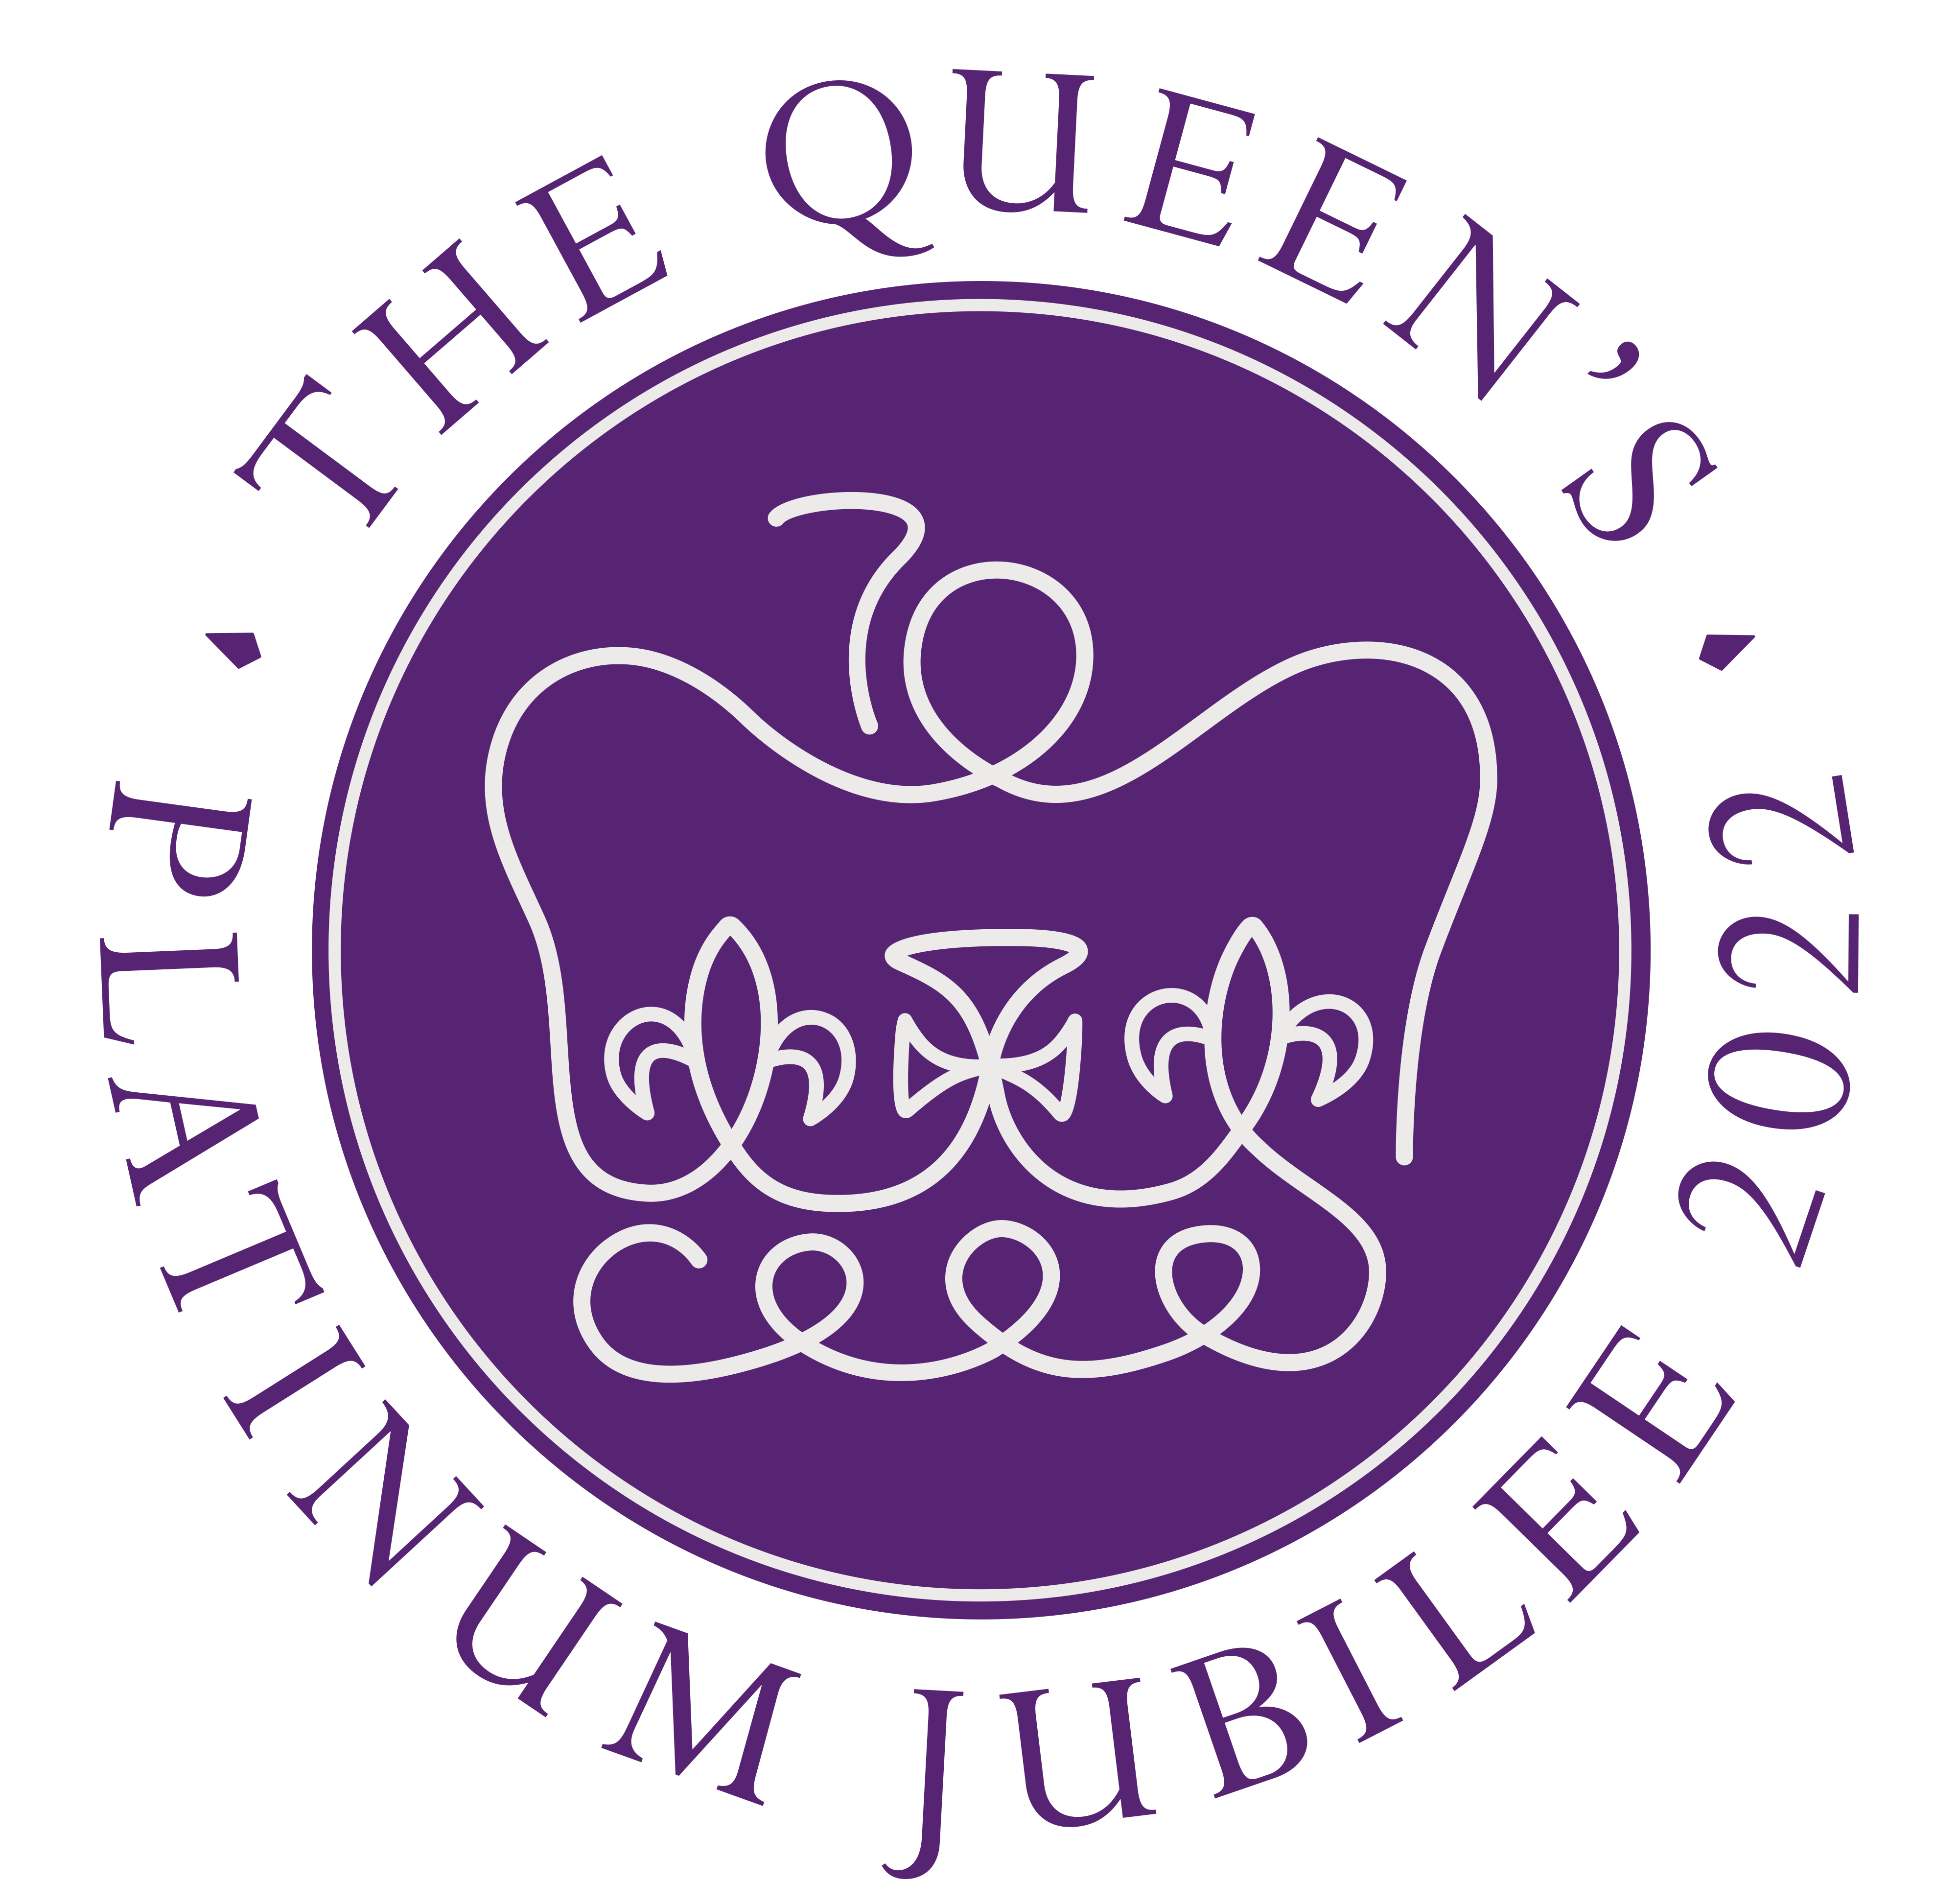 queensplatinumjubileelogo click or tap to find out what's on